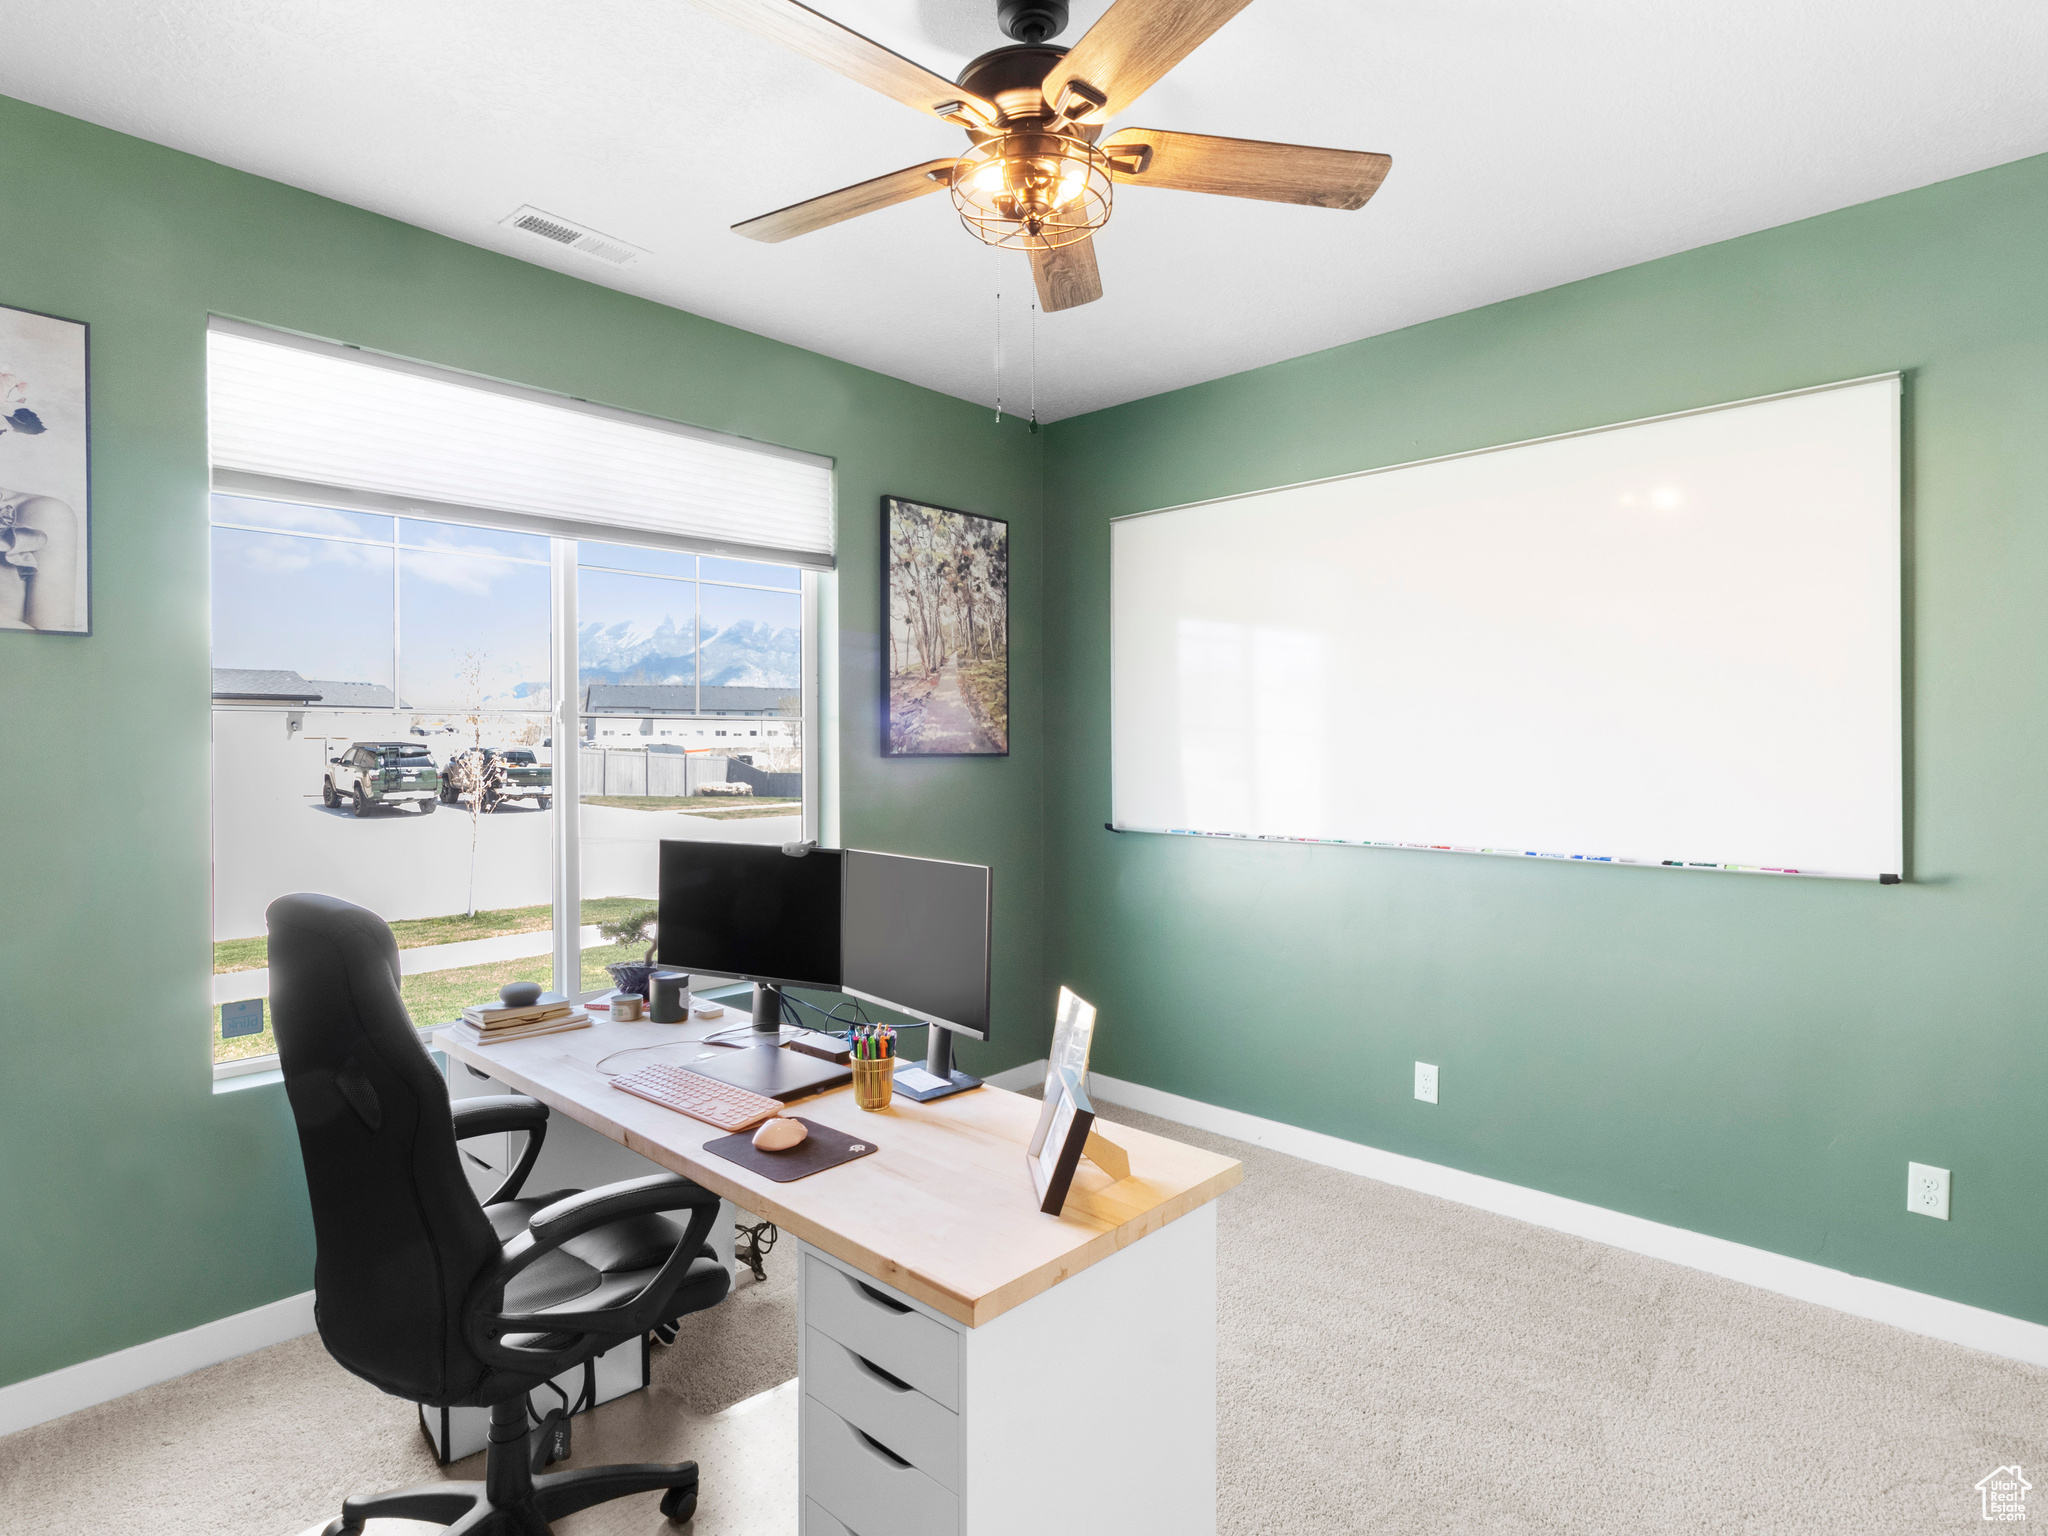 Carpeted office space with ceiling fan